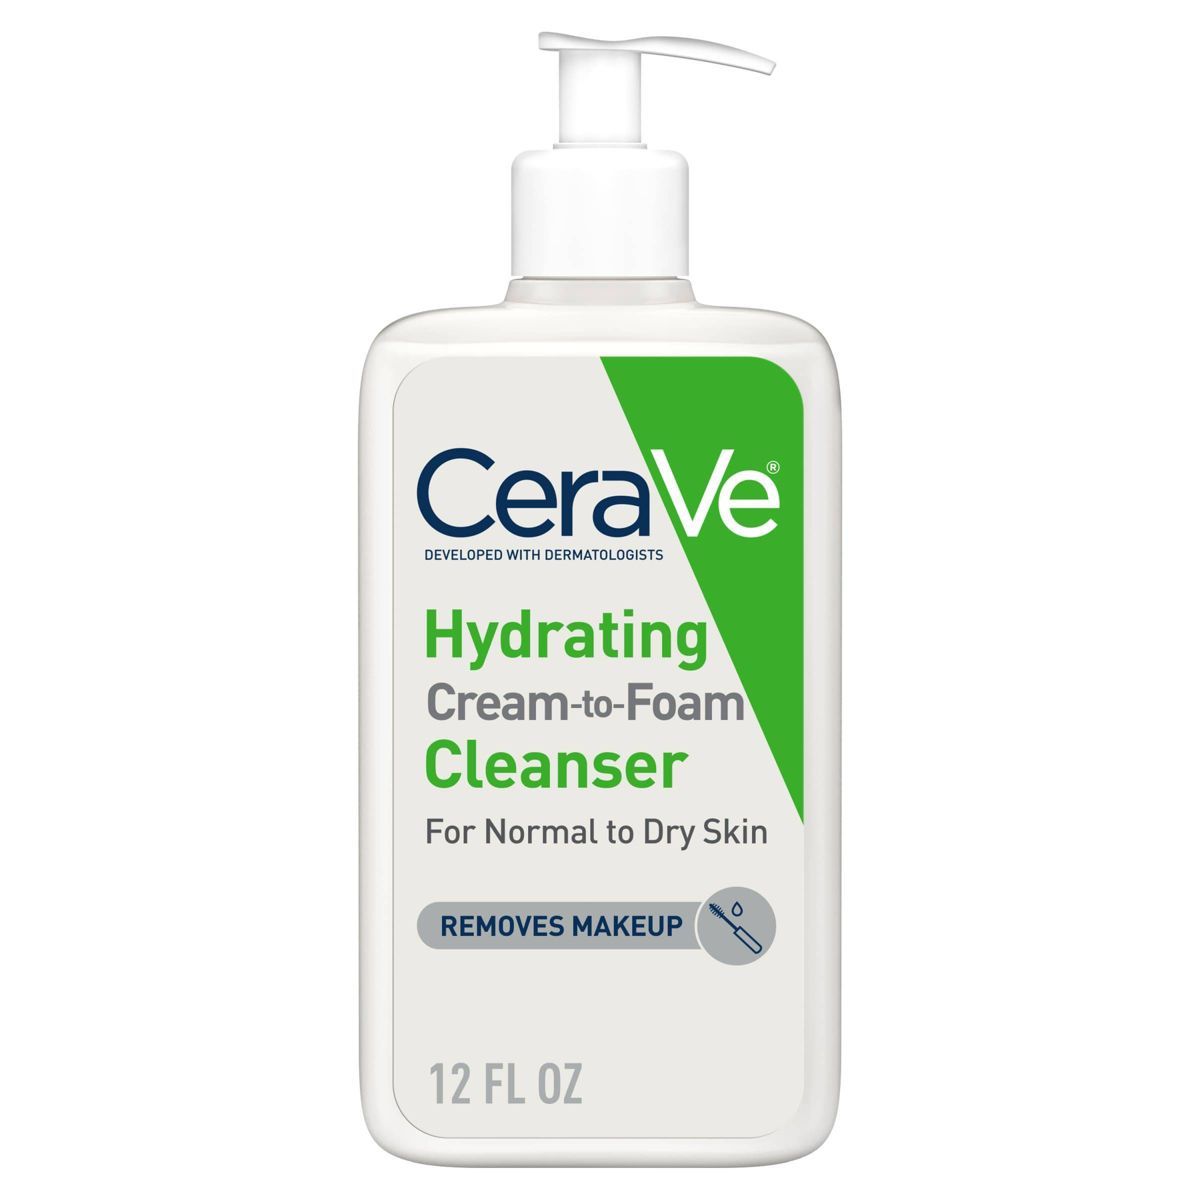 CeraVe Face Wash, Hydrating Cream-to-Foam Cleanser & Makeup Remover - 12oz | Target